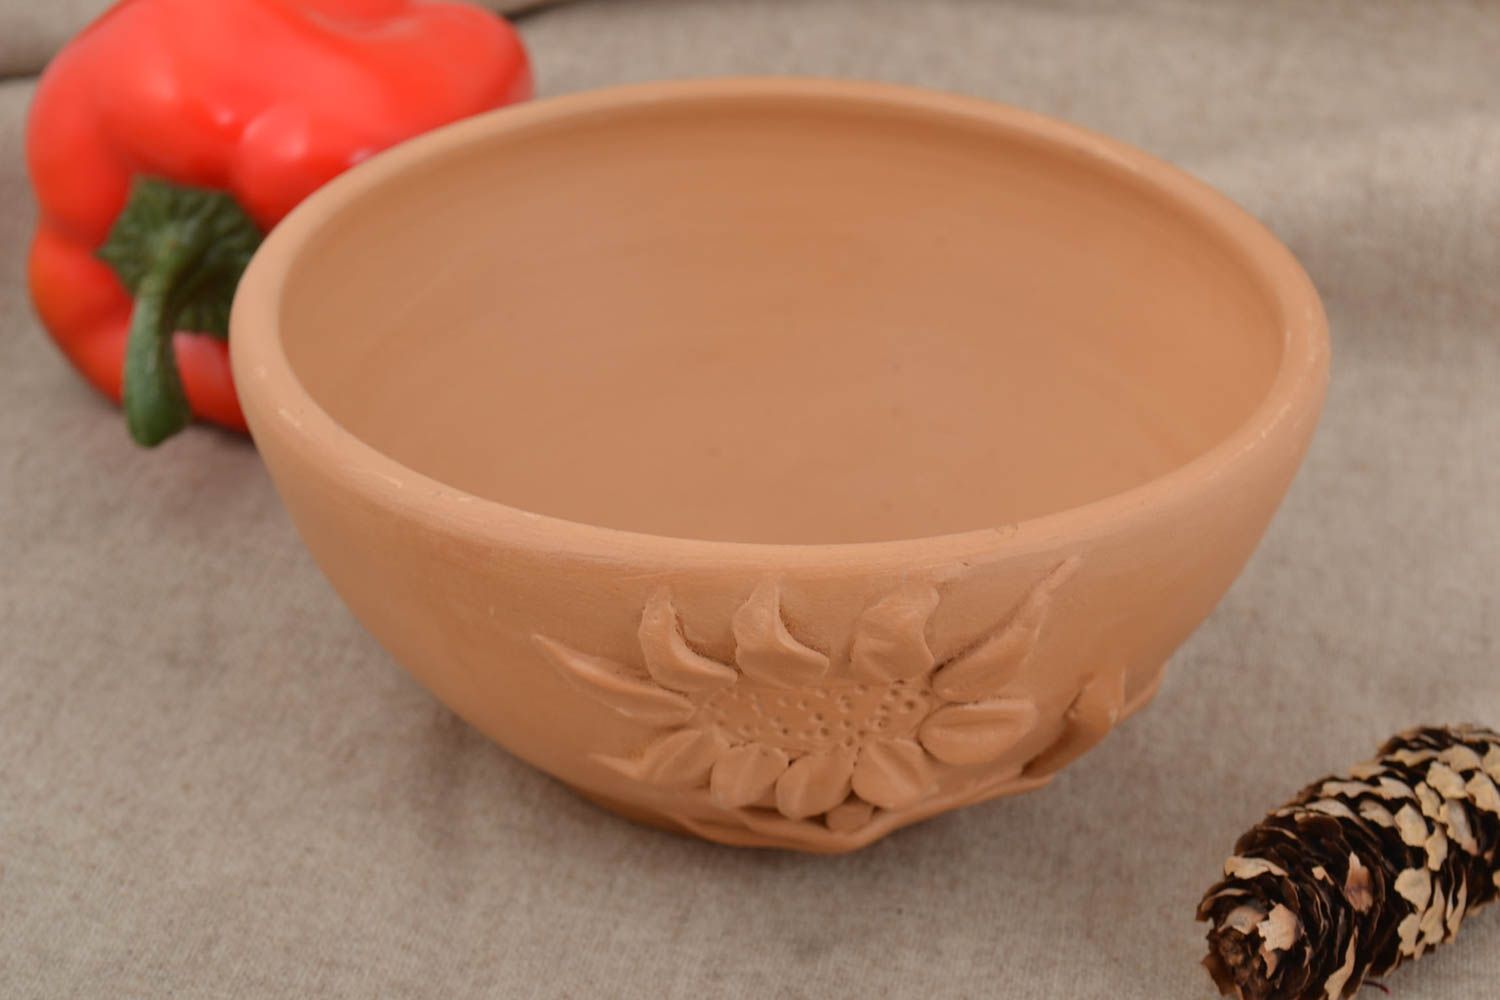 3-inch ceramic soup bowl with molded sunflower pattern in light terracotta color 1lb photo 1